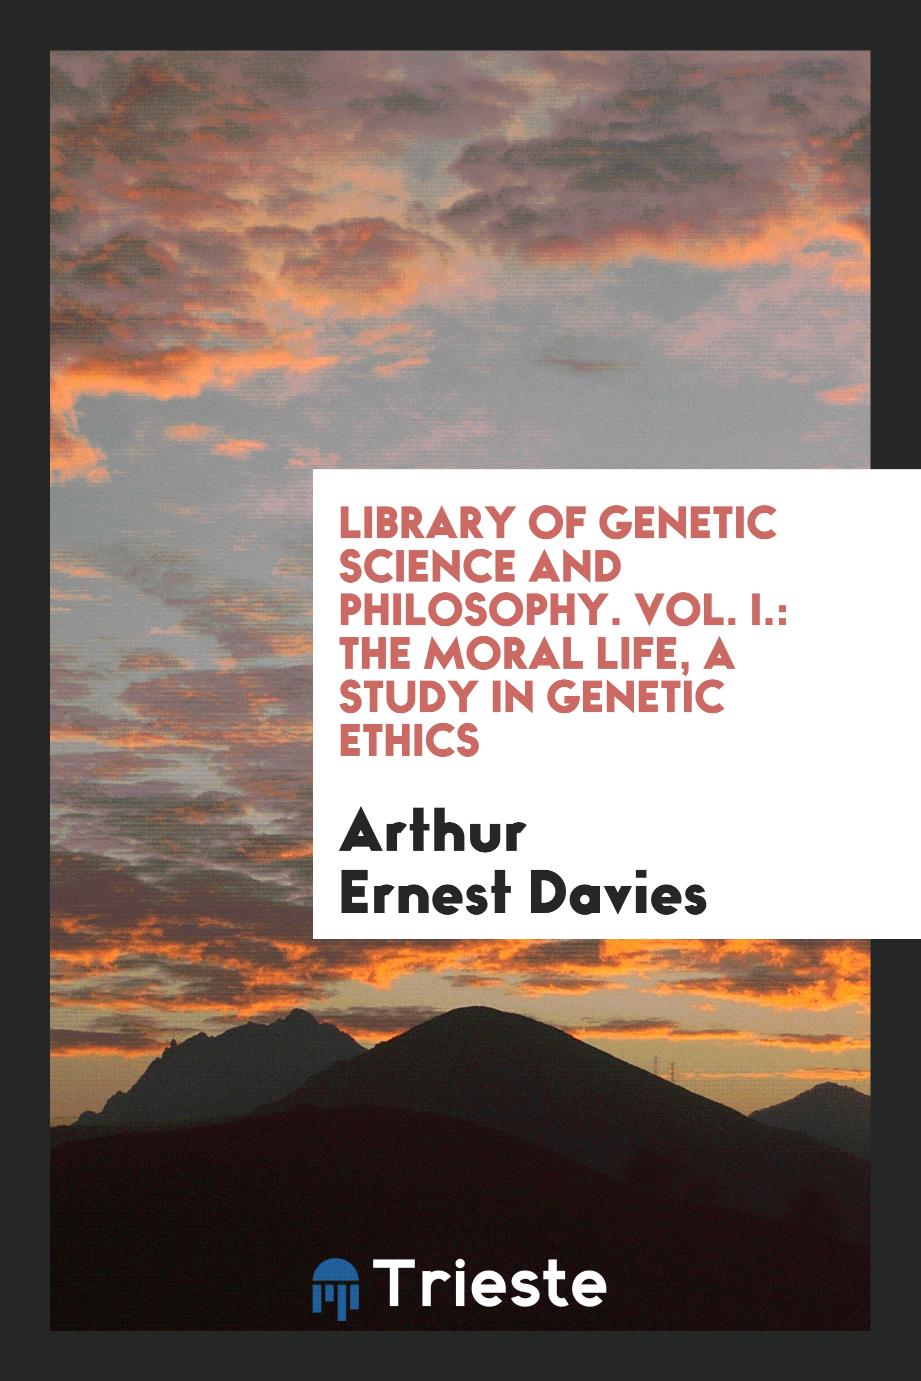 Library of Genetic Science and philosophy. Vol. I.: The moral life, a study in genetic ethics